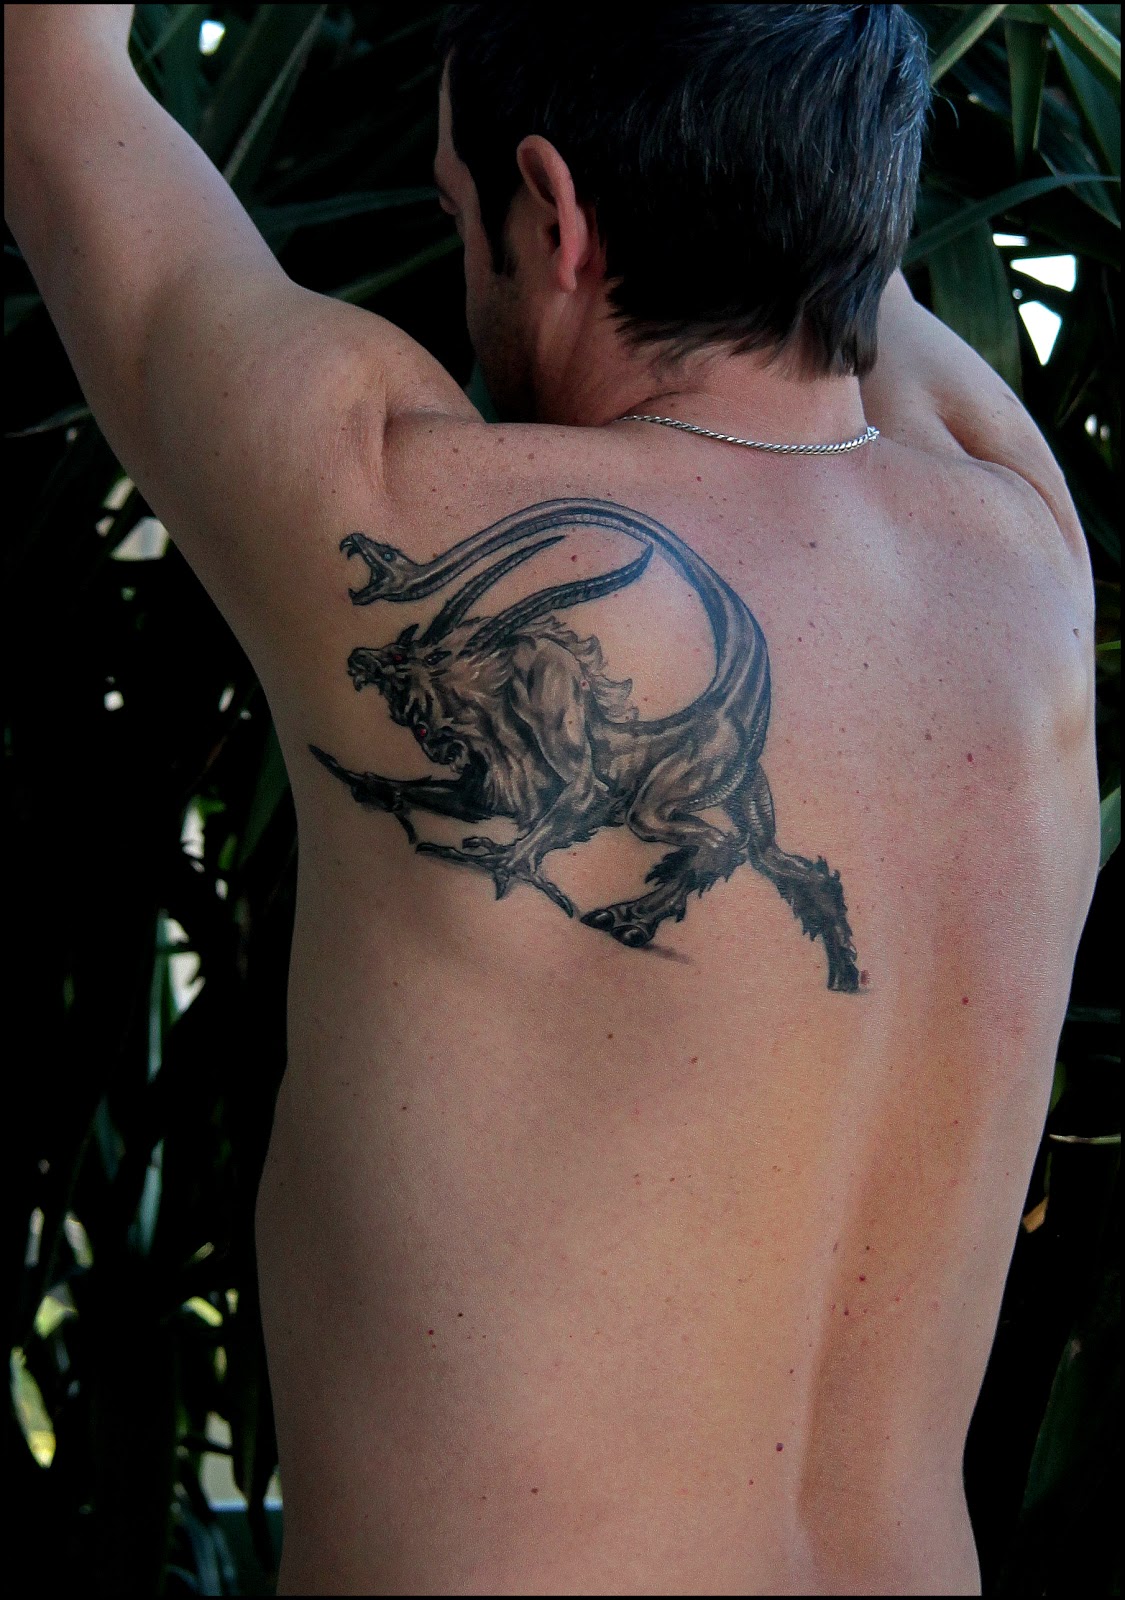 sotris like motoris: The Man with the CHIMERA tattoo..